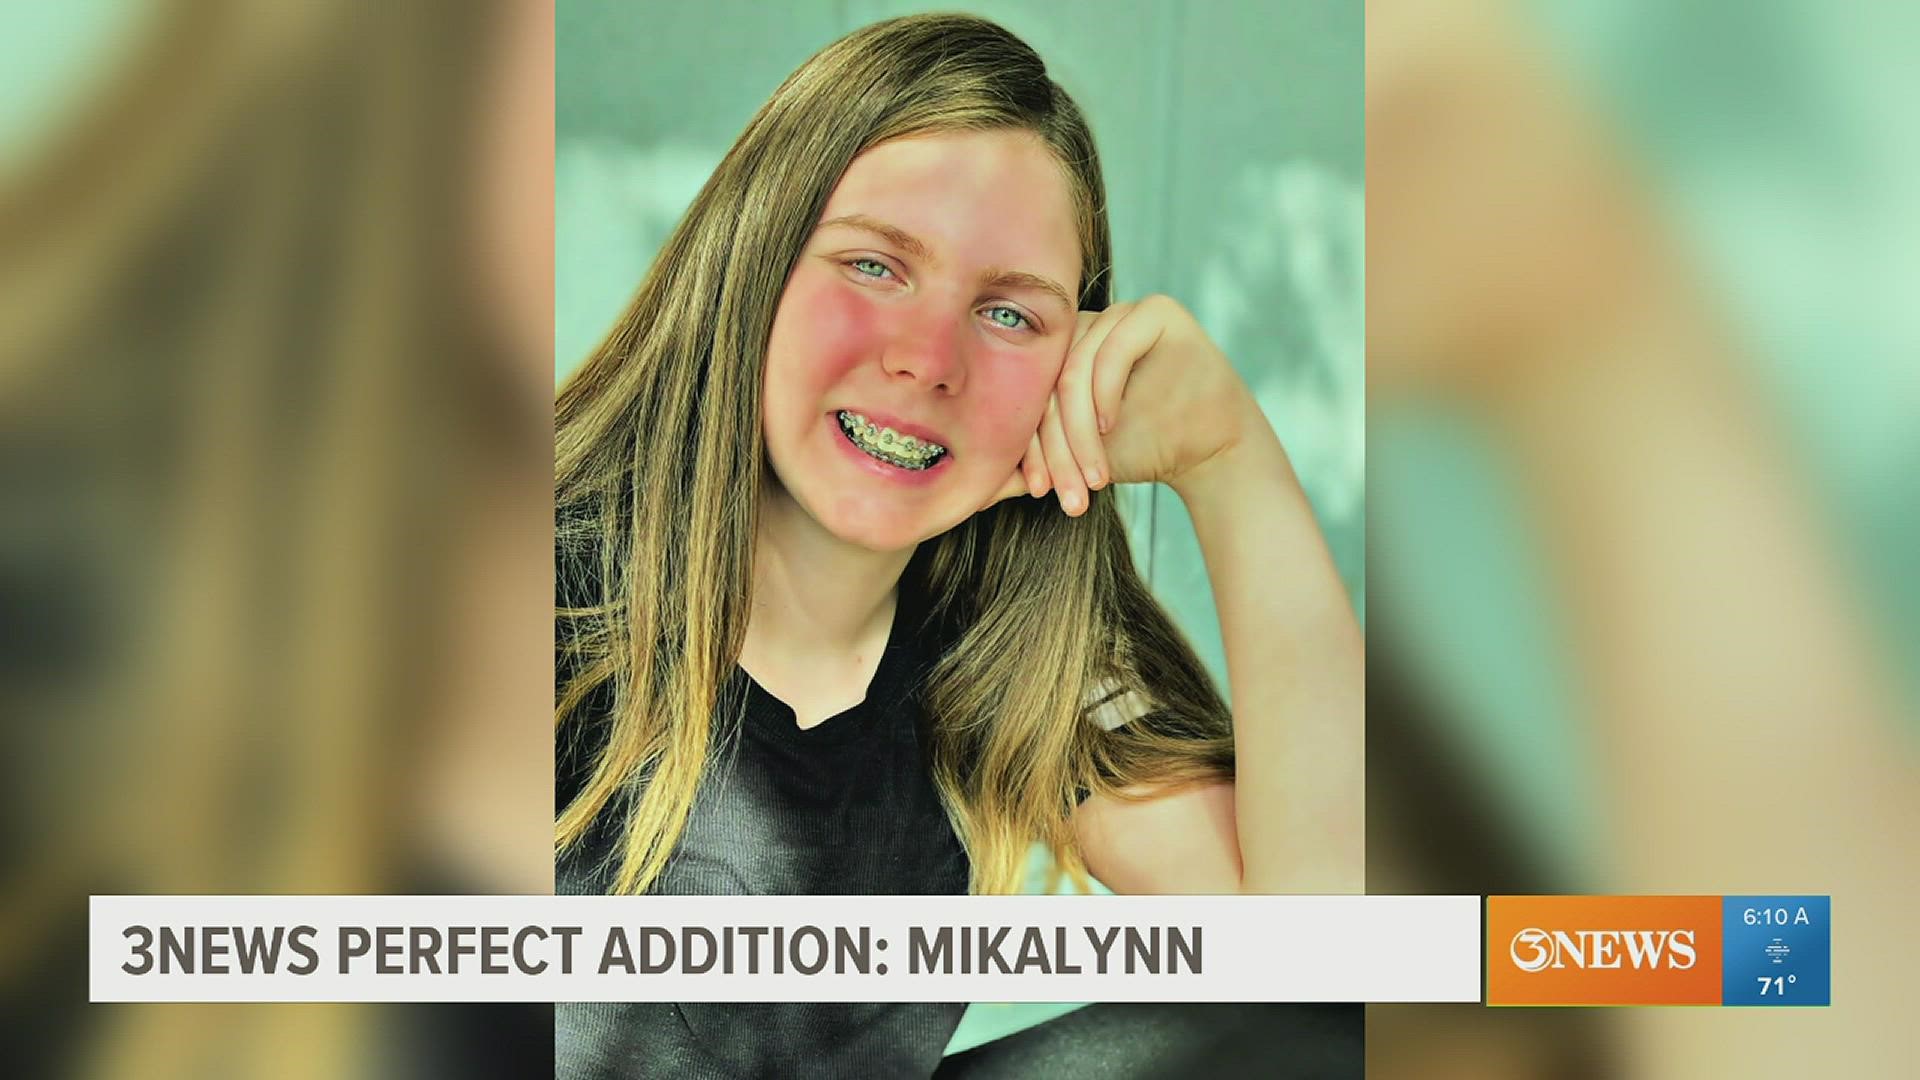 14-year-old Mikalynn loves to engage in gymnastics and could be the Perfect Addition to your family